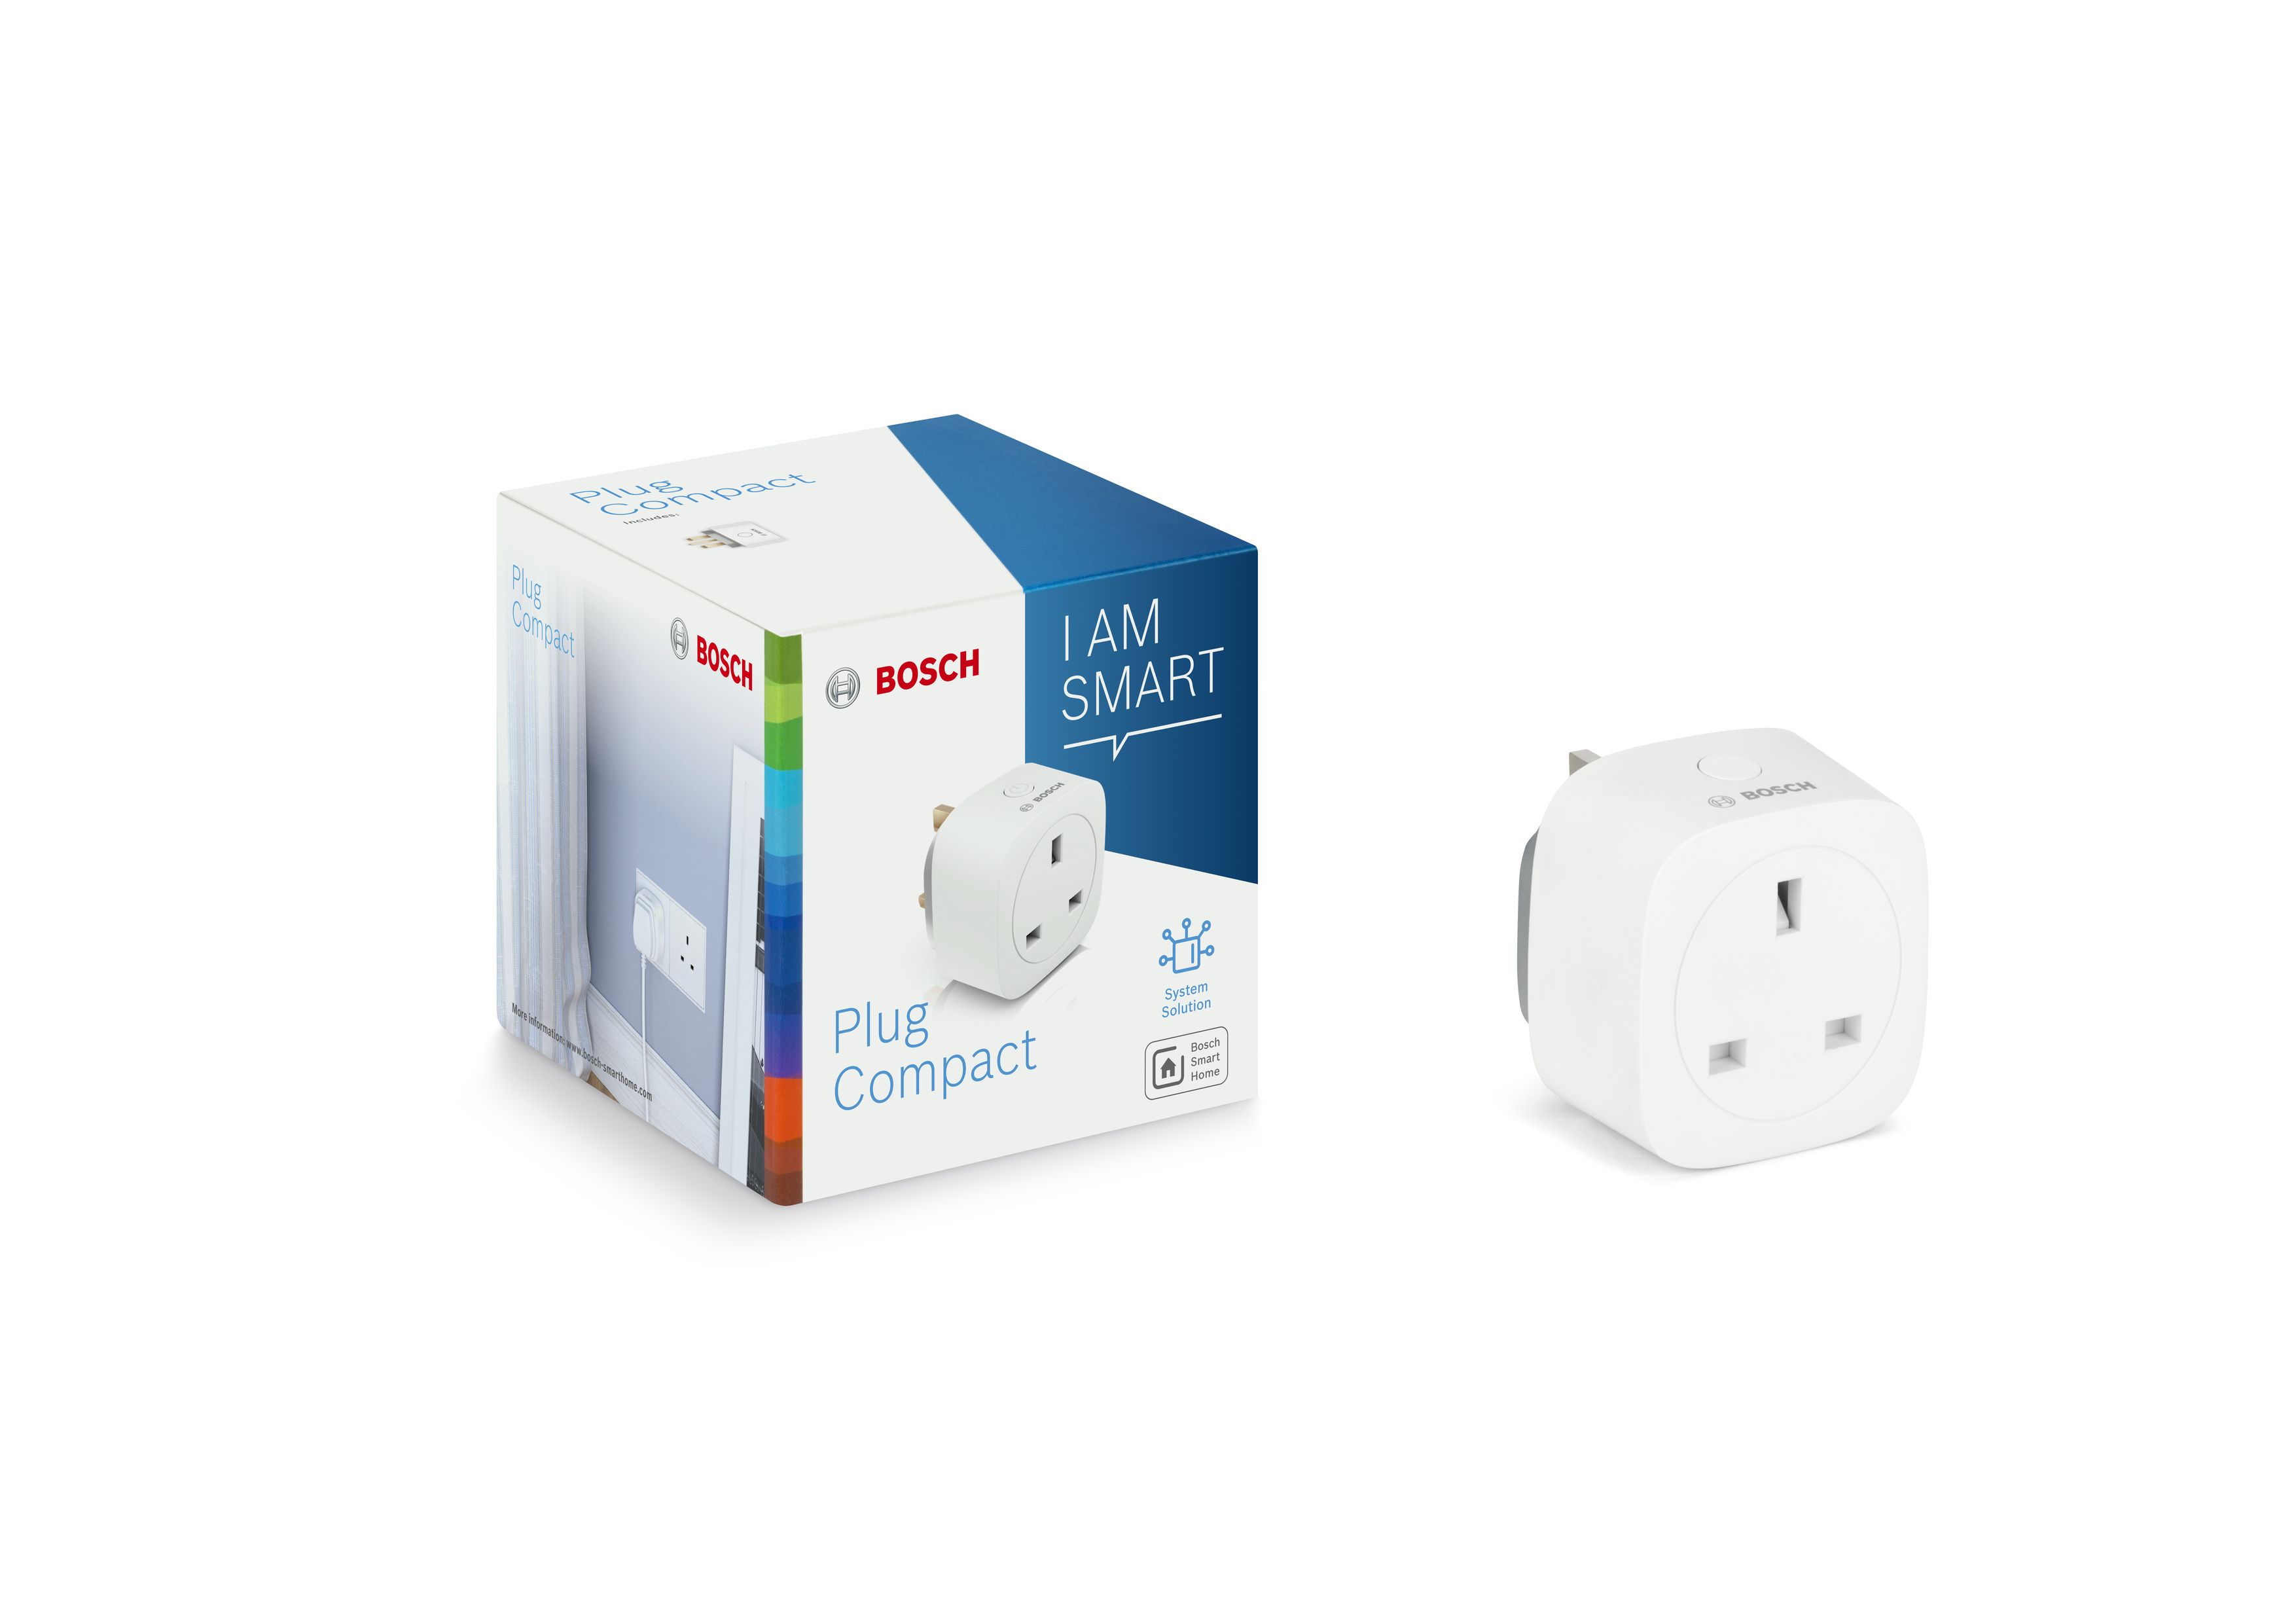 Works with, Bosch Smart Home